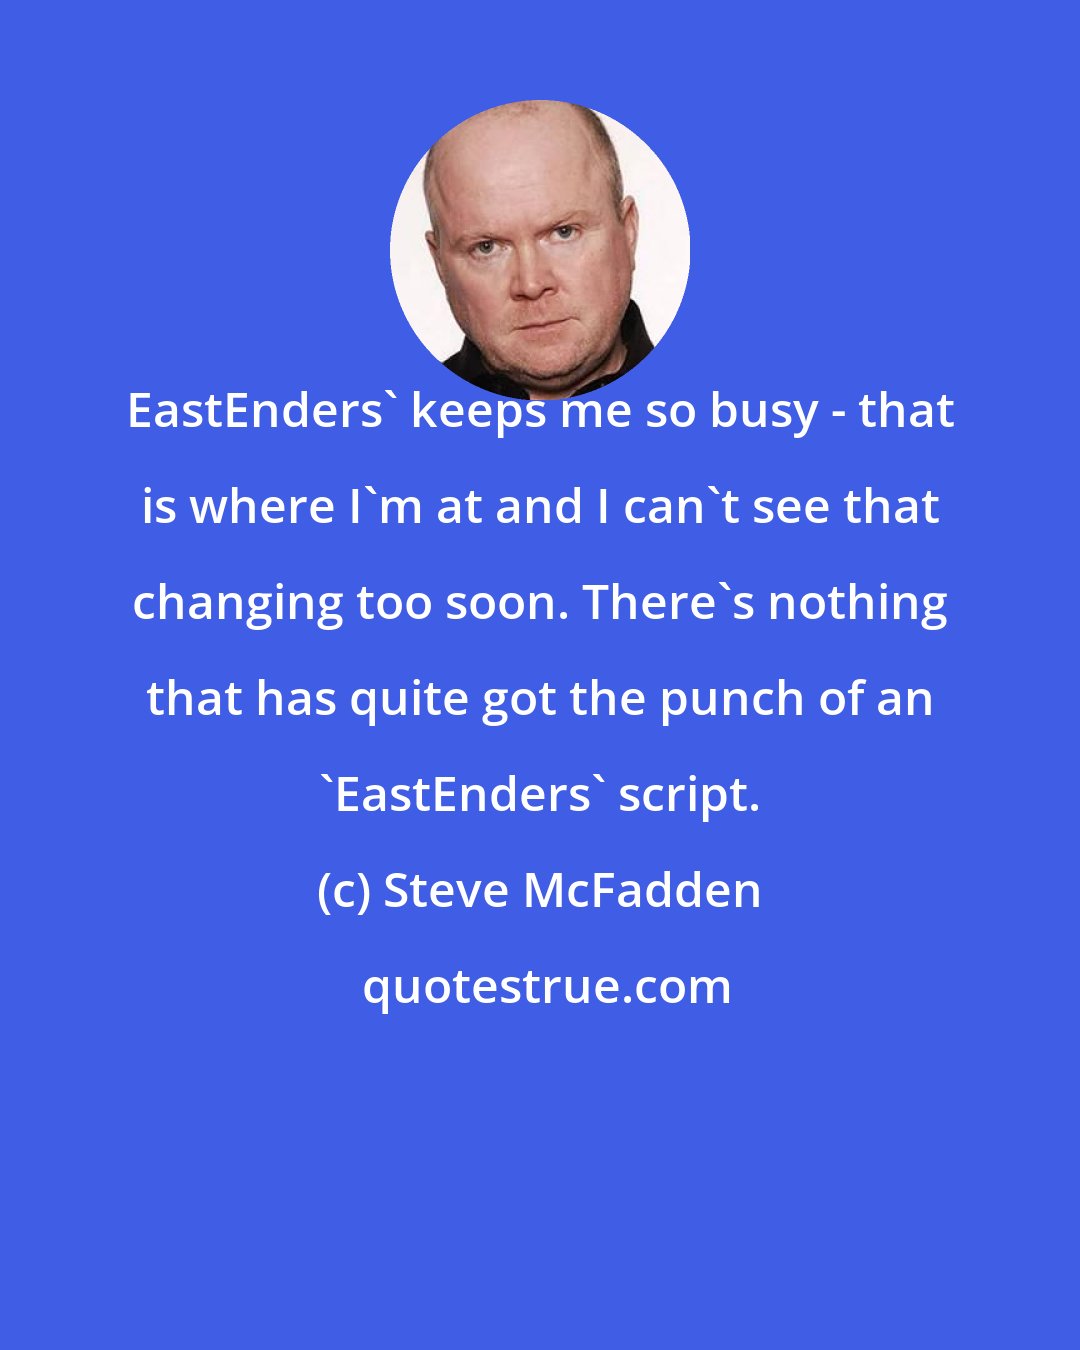 Steve McFadden: EastEnders' keeps me so busy - that is where I'm at and I can't see that changing too soon. There's nothing that has quite got the punch of an 'EastEnders' script.